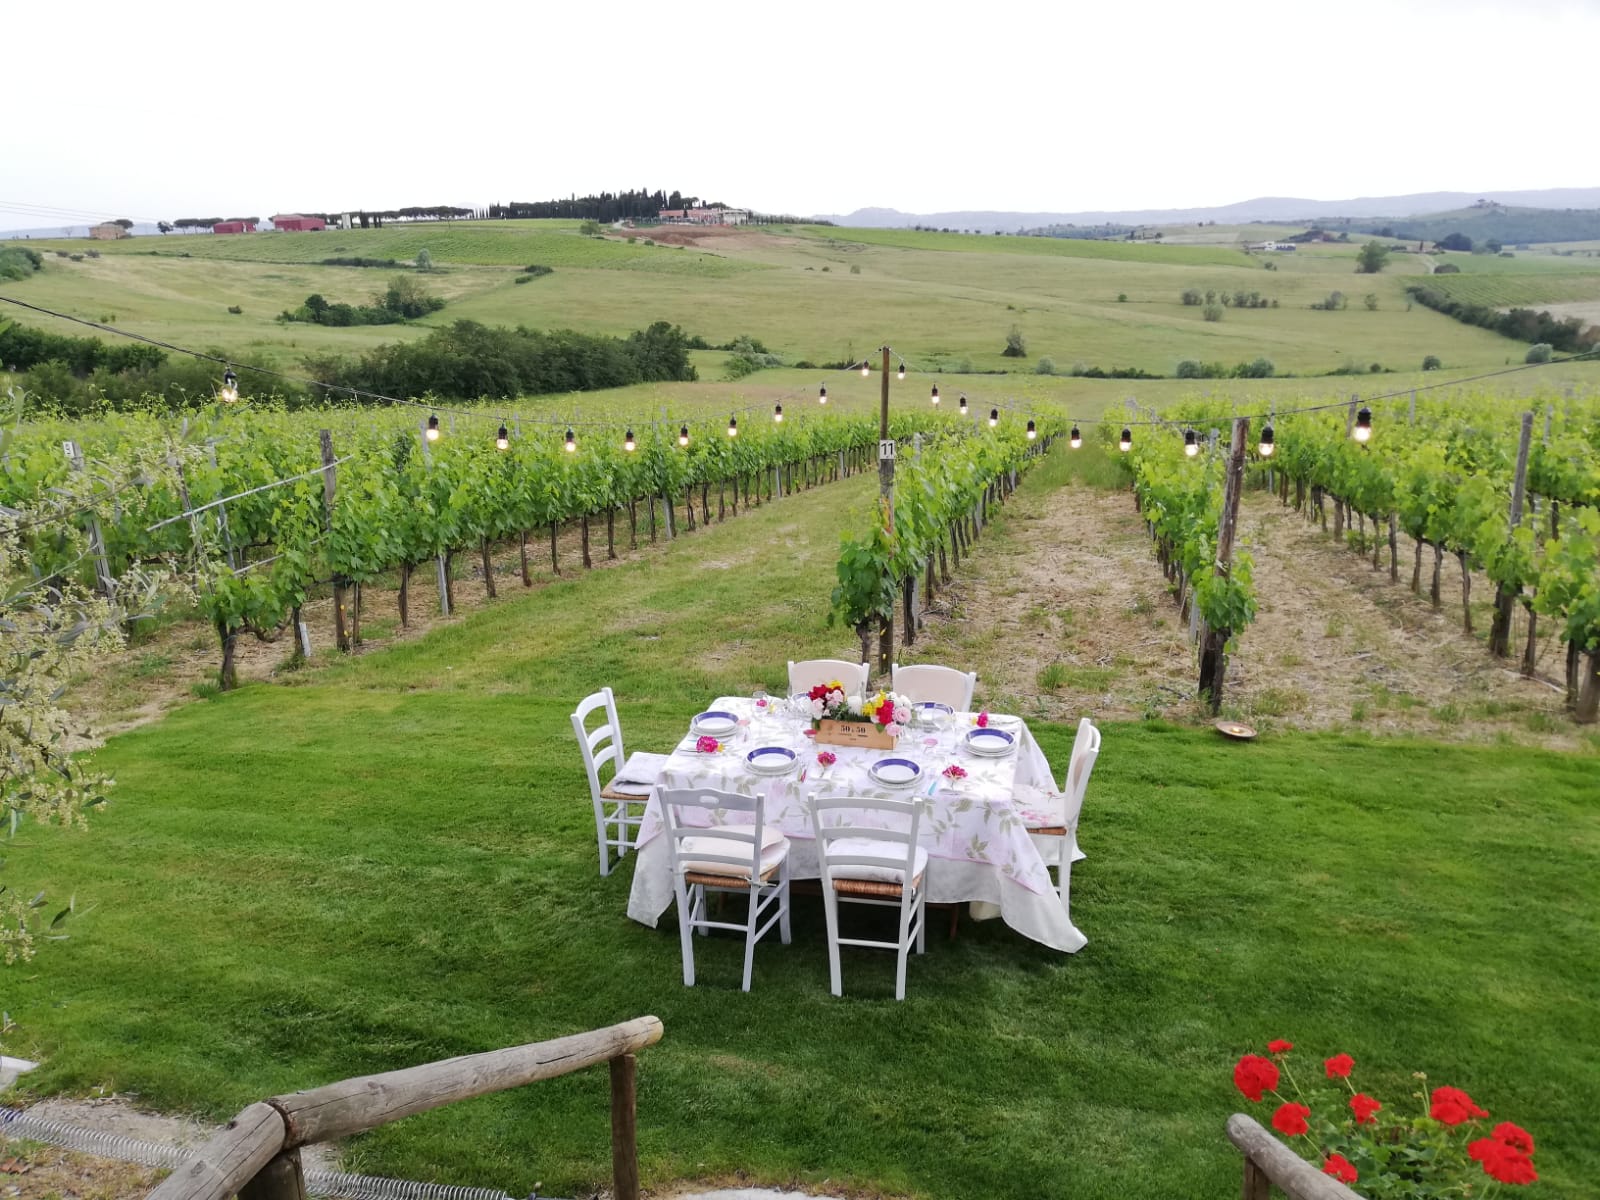 Dolce Vita Experiences in Tuscany